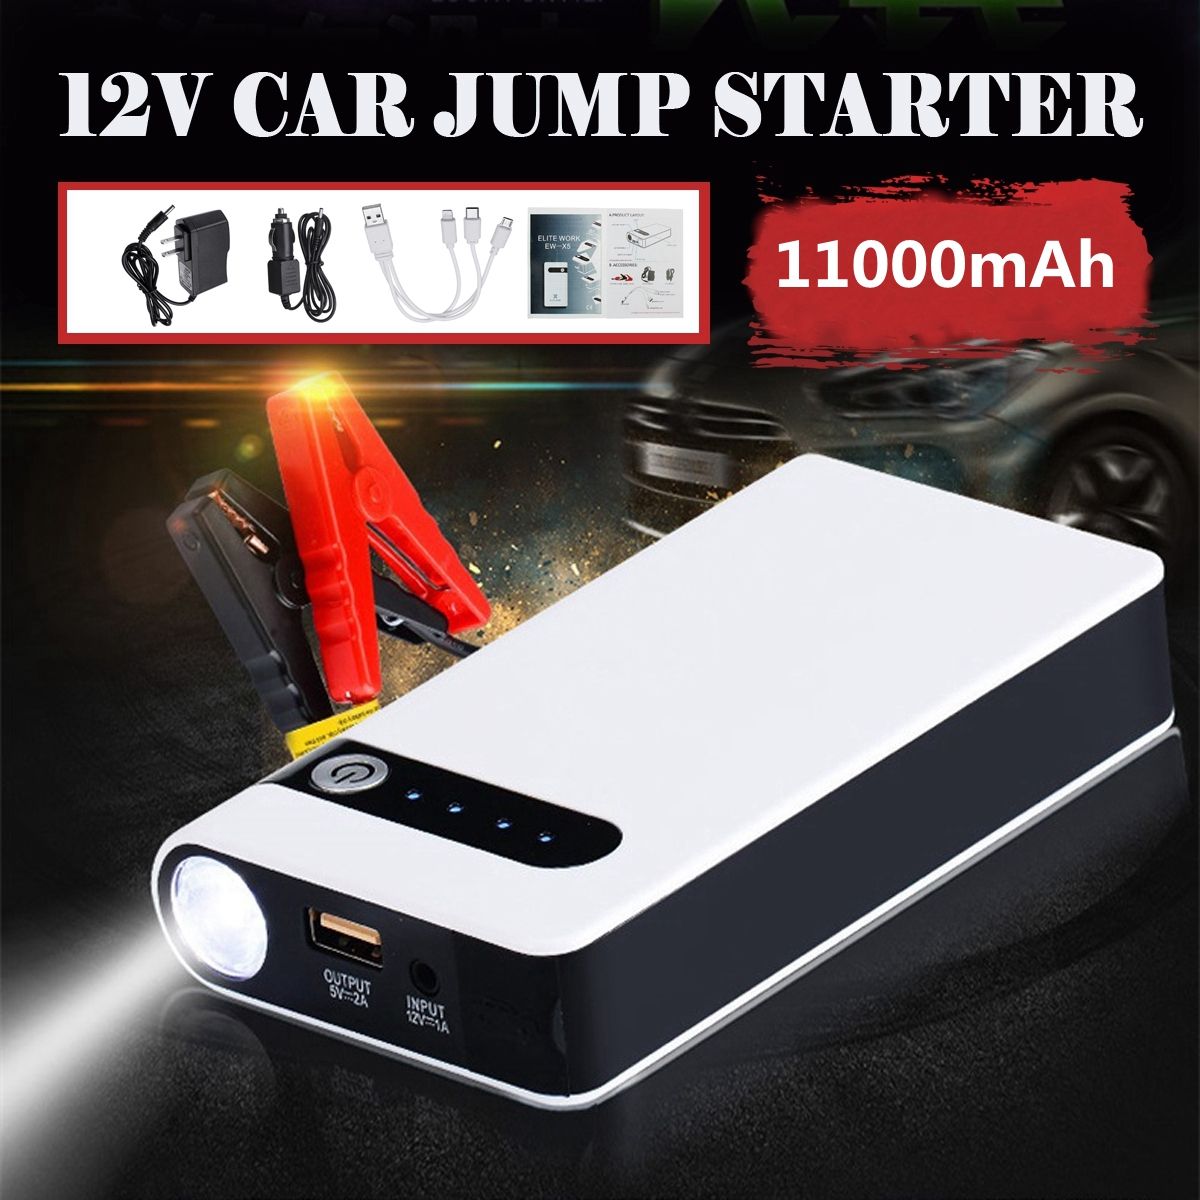 11000mAh-12V-Portable-Car-Jump-Starter-Emergency-Battery-Booster-Powerbank-Waterproof-with-LED-Flash-1611331